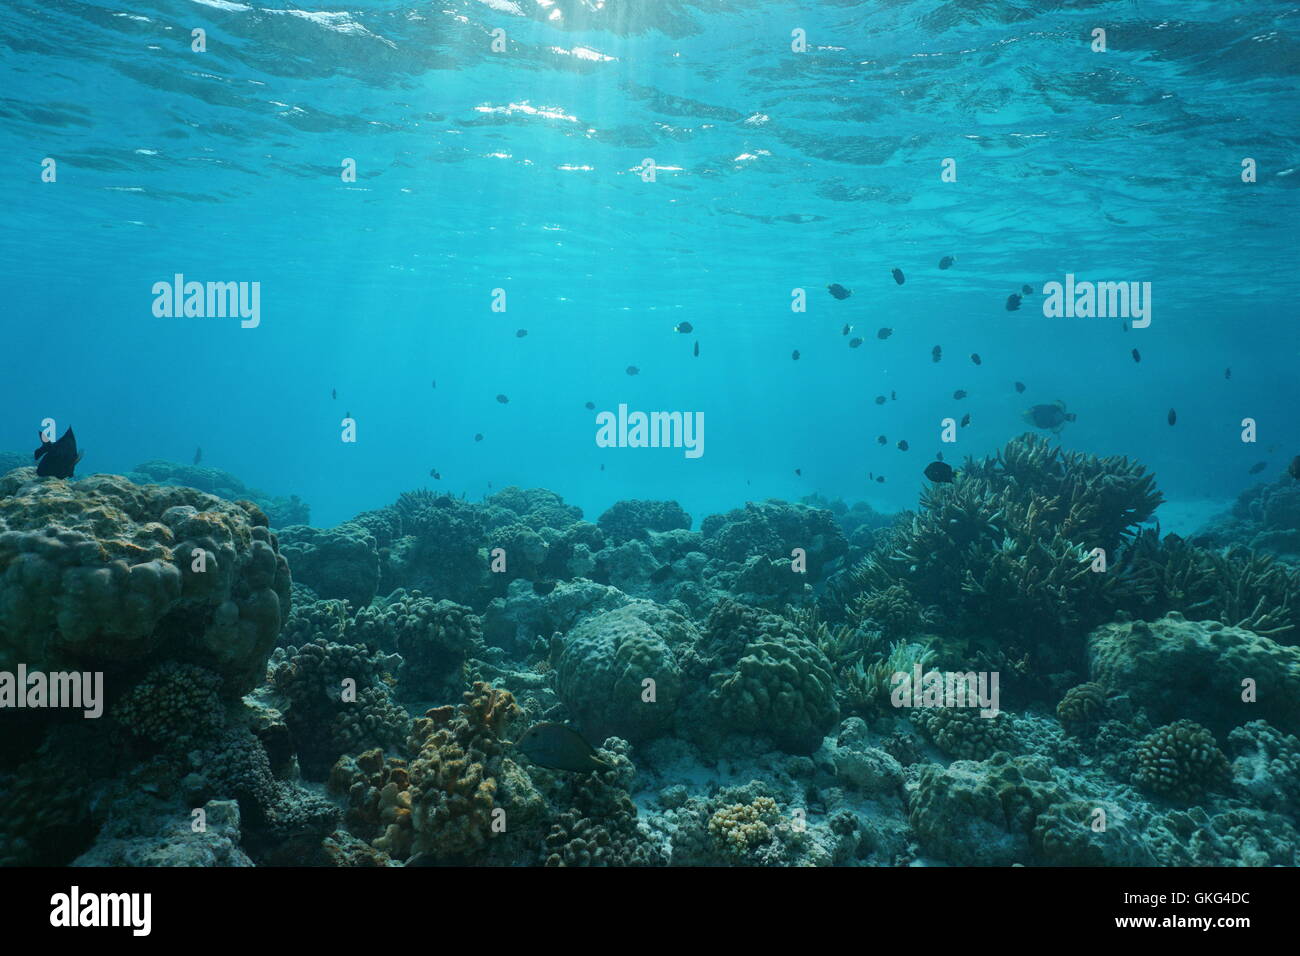 Shallow ocean floor with coral reef and fish, natural scene, Rangiroa lagoon, Pacific ocean, French Polynesia Stock Photo